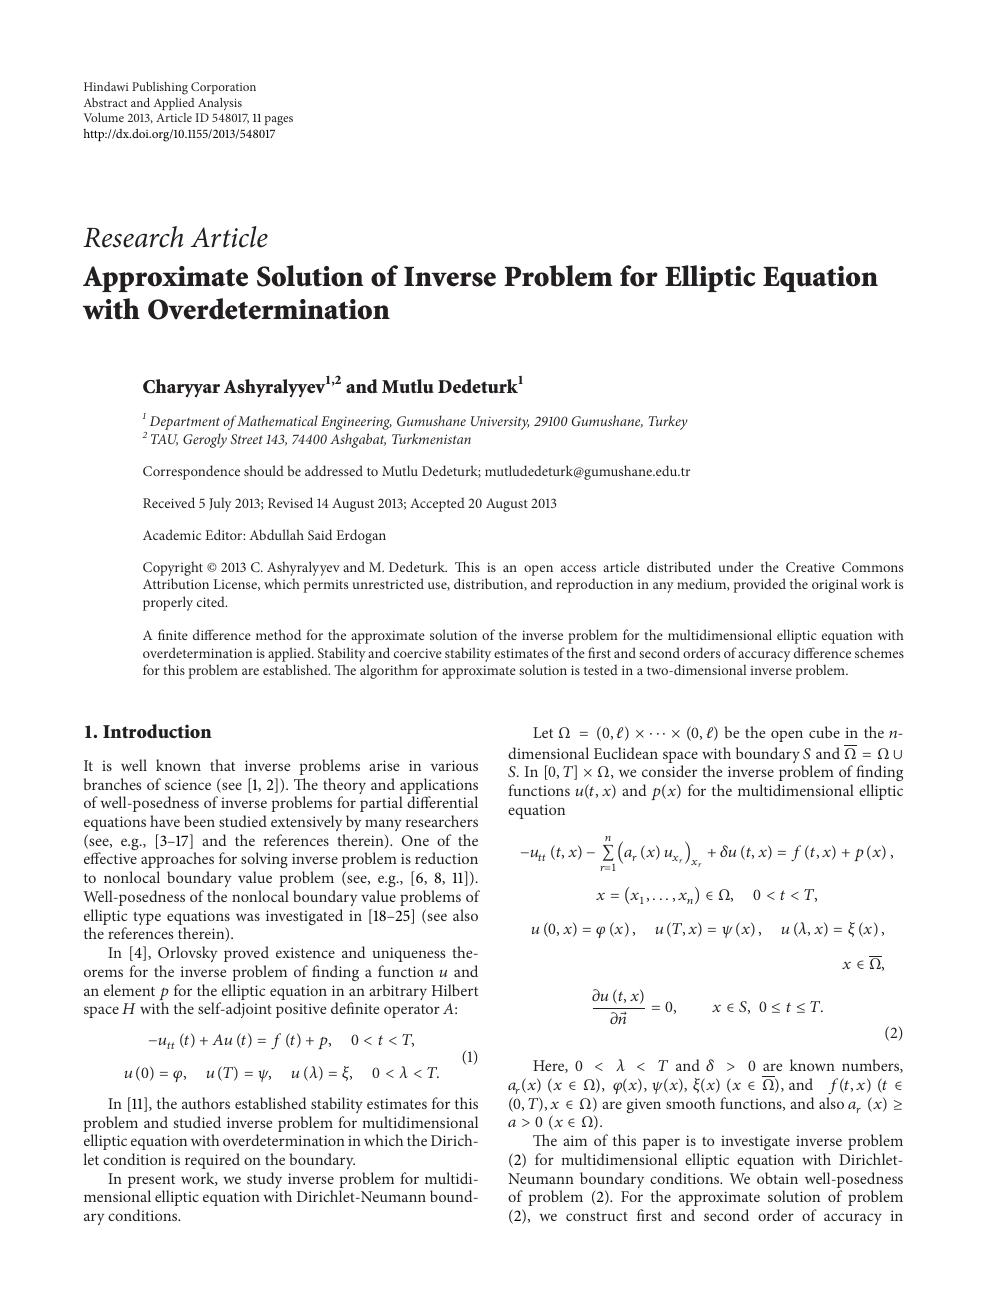 Approximate Solution Of Inverse Problem For Elliptic Equation With Overdetermination Topic Of Research Paper In Mathematics Download Scholarly Article Pdf And Read For Free On Cyberleninka Open Science Hub